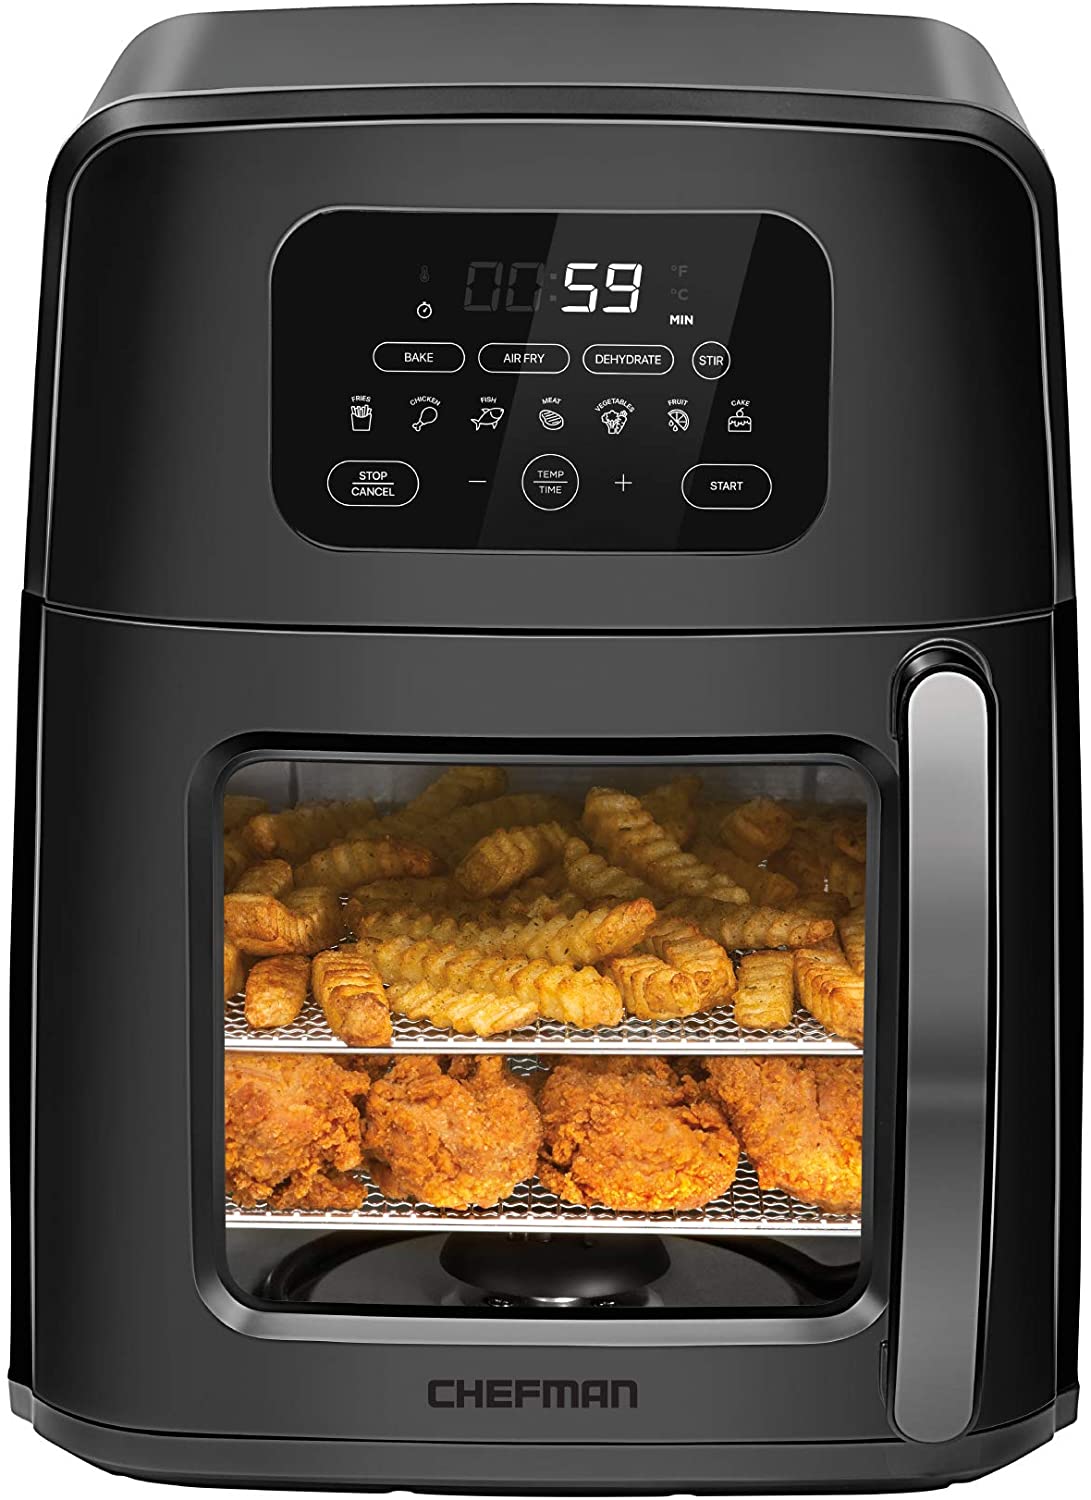 Best air fryer toaster oven consumer reports in 2021